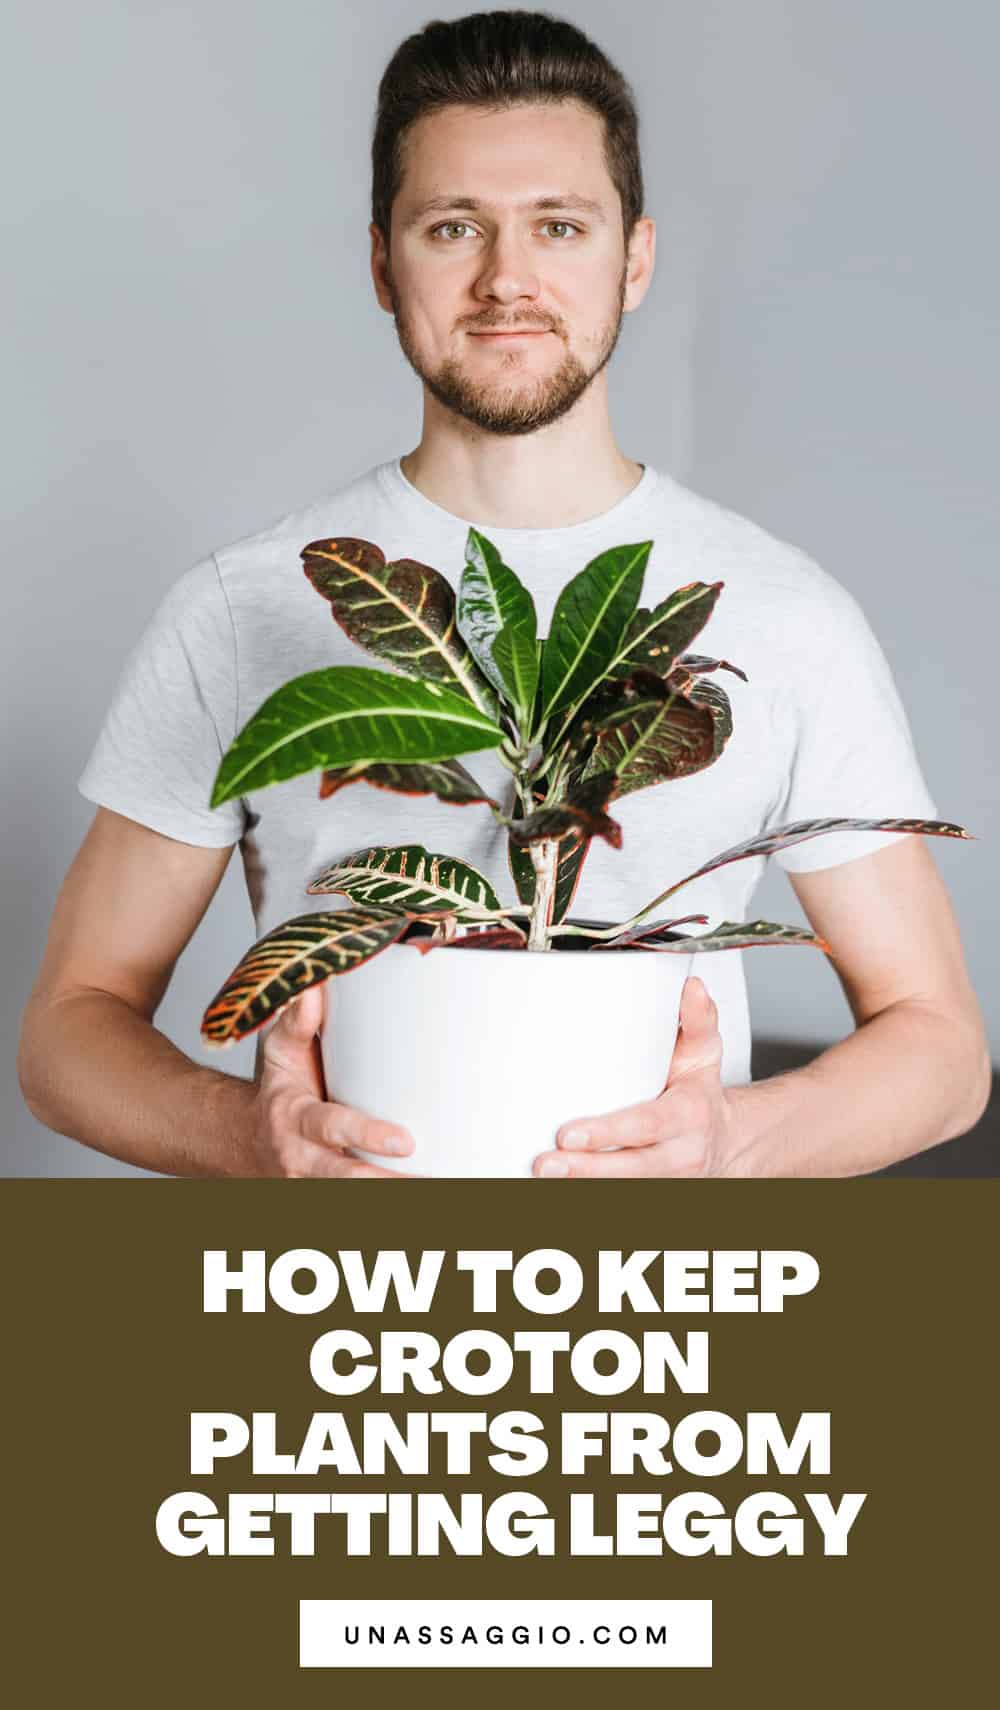 How do you keep croton plants from getting long?